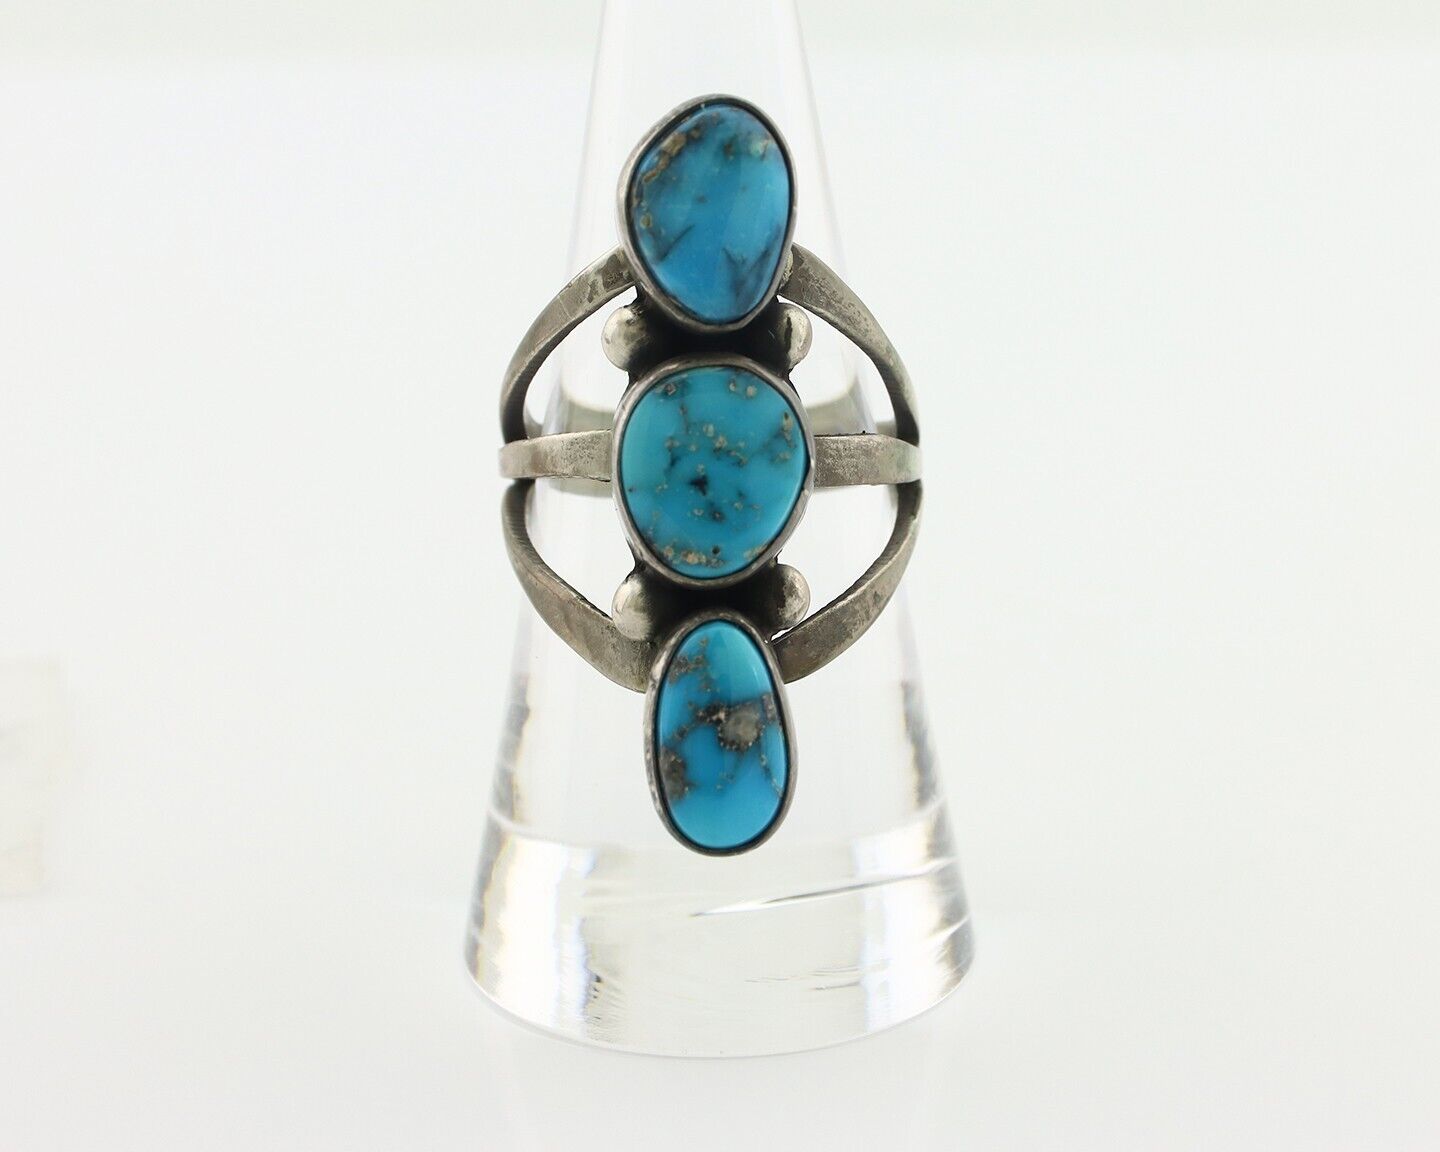 Navajo Ring 925 Silver Natural Blue Turquoise Native American Artist C.80's